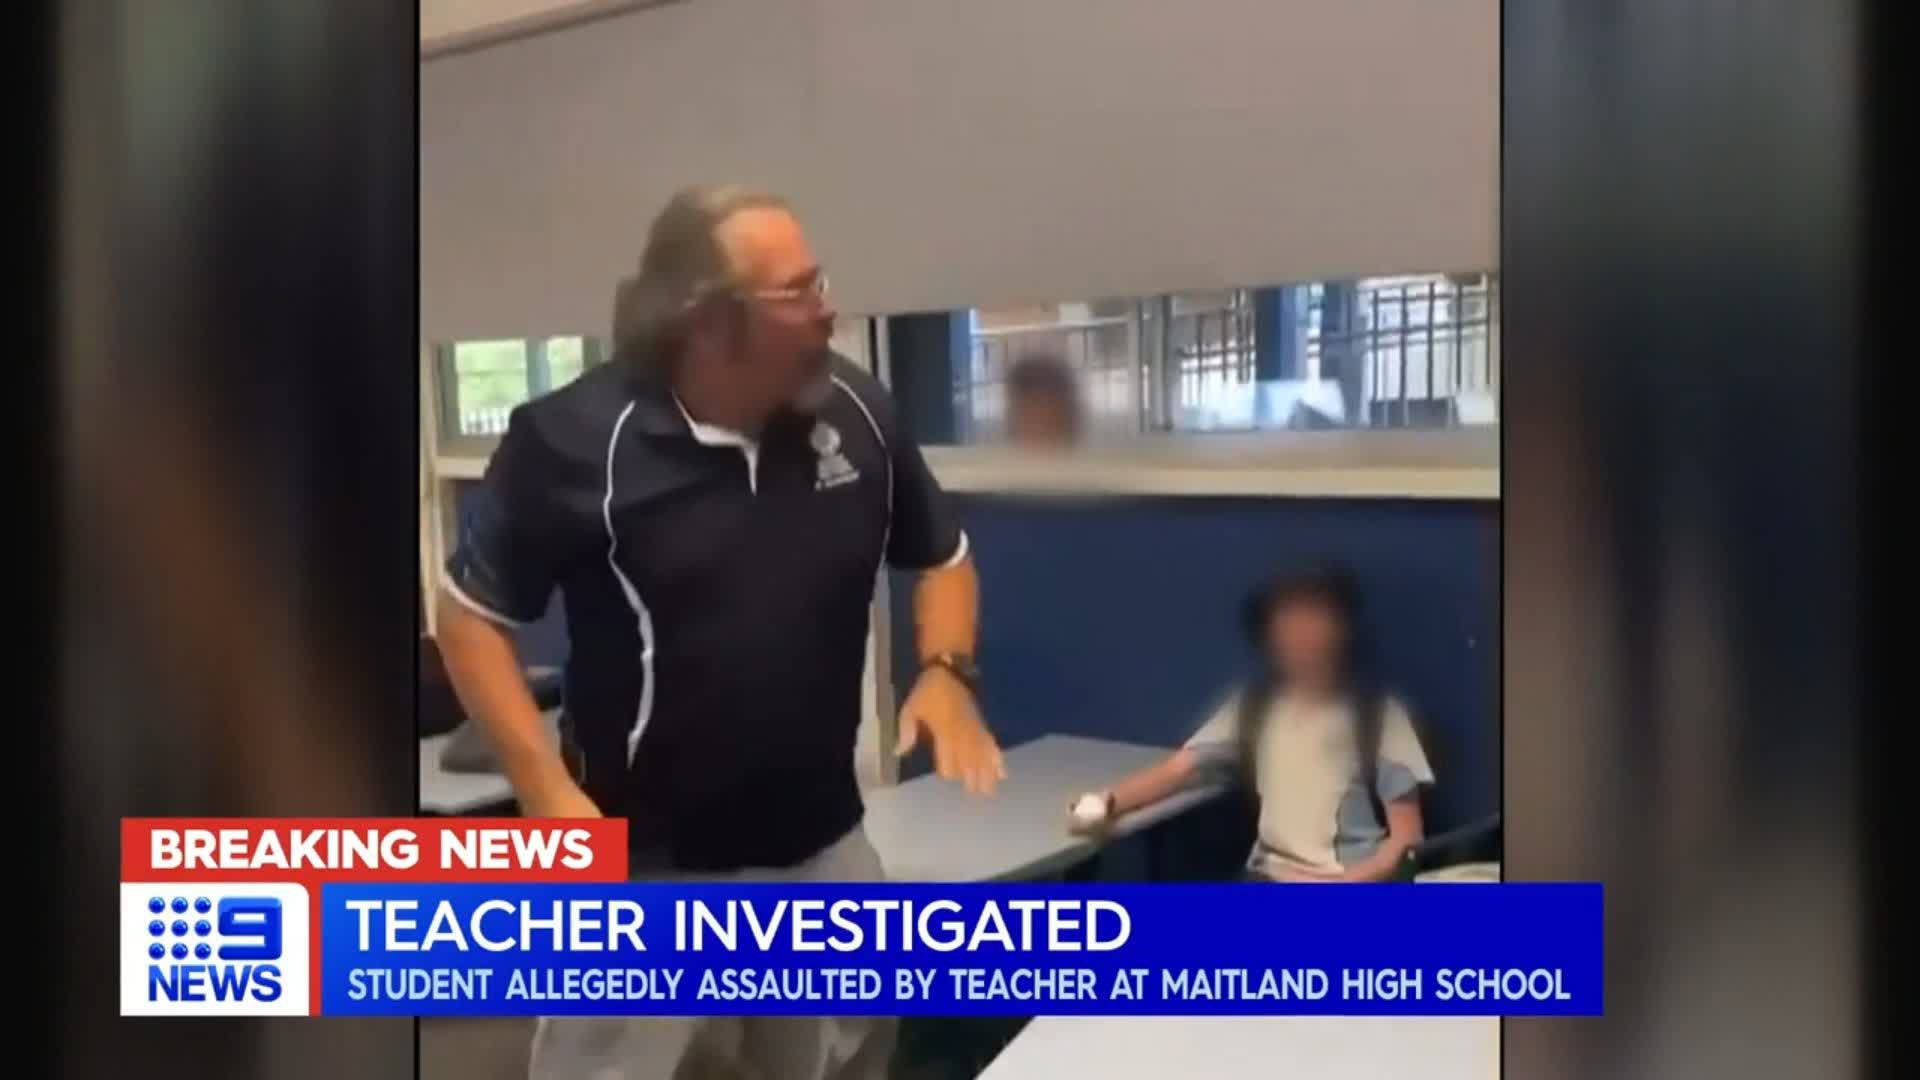 9News Sydney on Twitter: "DEVELOPING: A brawl between a teacher and his students at Maitland, in the Lower Hunter Valley has been caught on camera, showing, what looks like, a paper fight